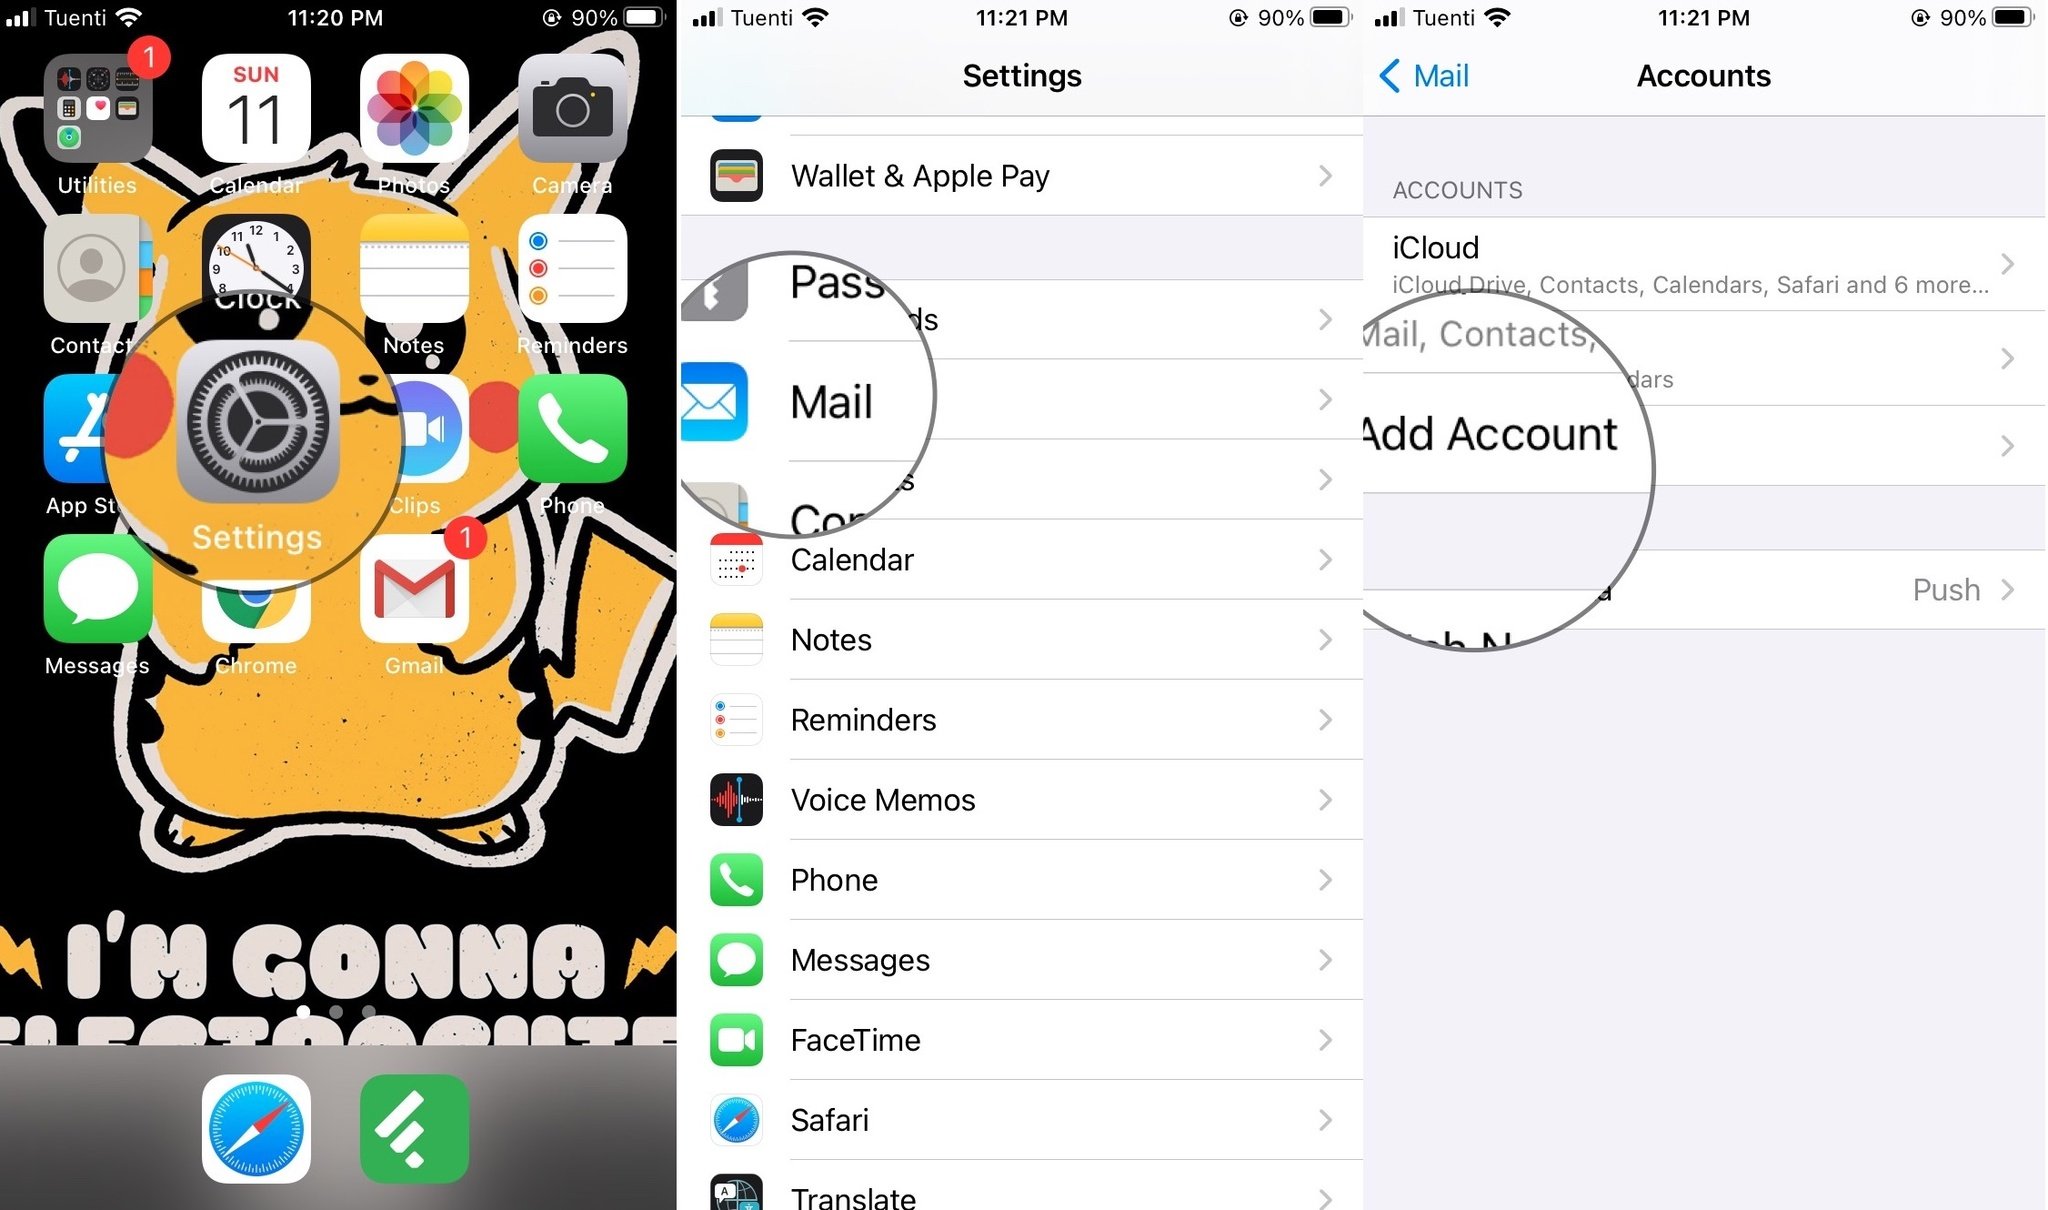 How to set up mail on iPhone or iPad by showing steps: Open Settings, tap on Mail, tap Accounts, Select Add account